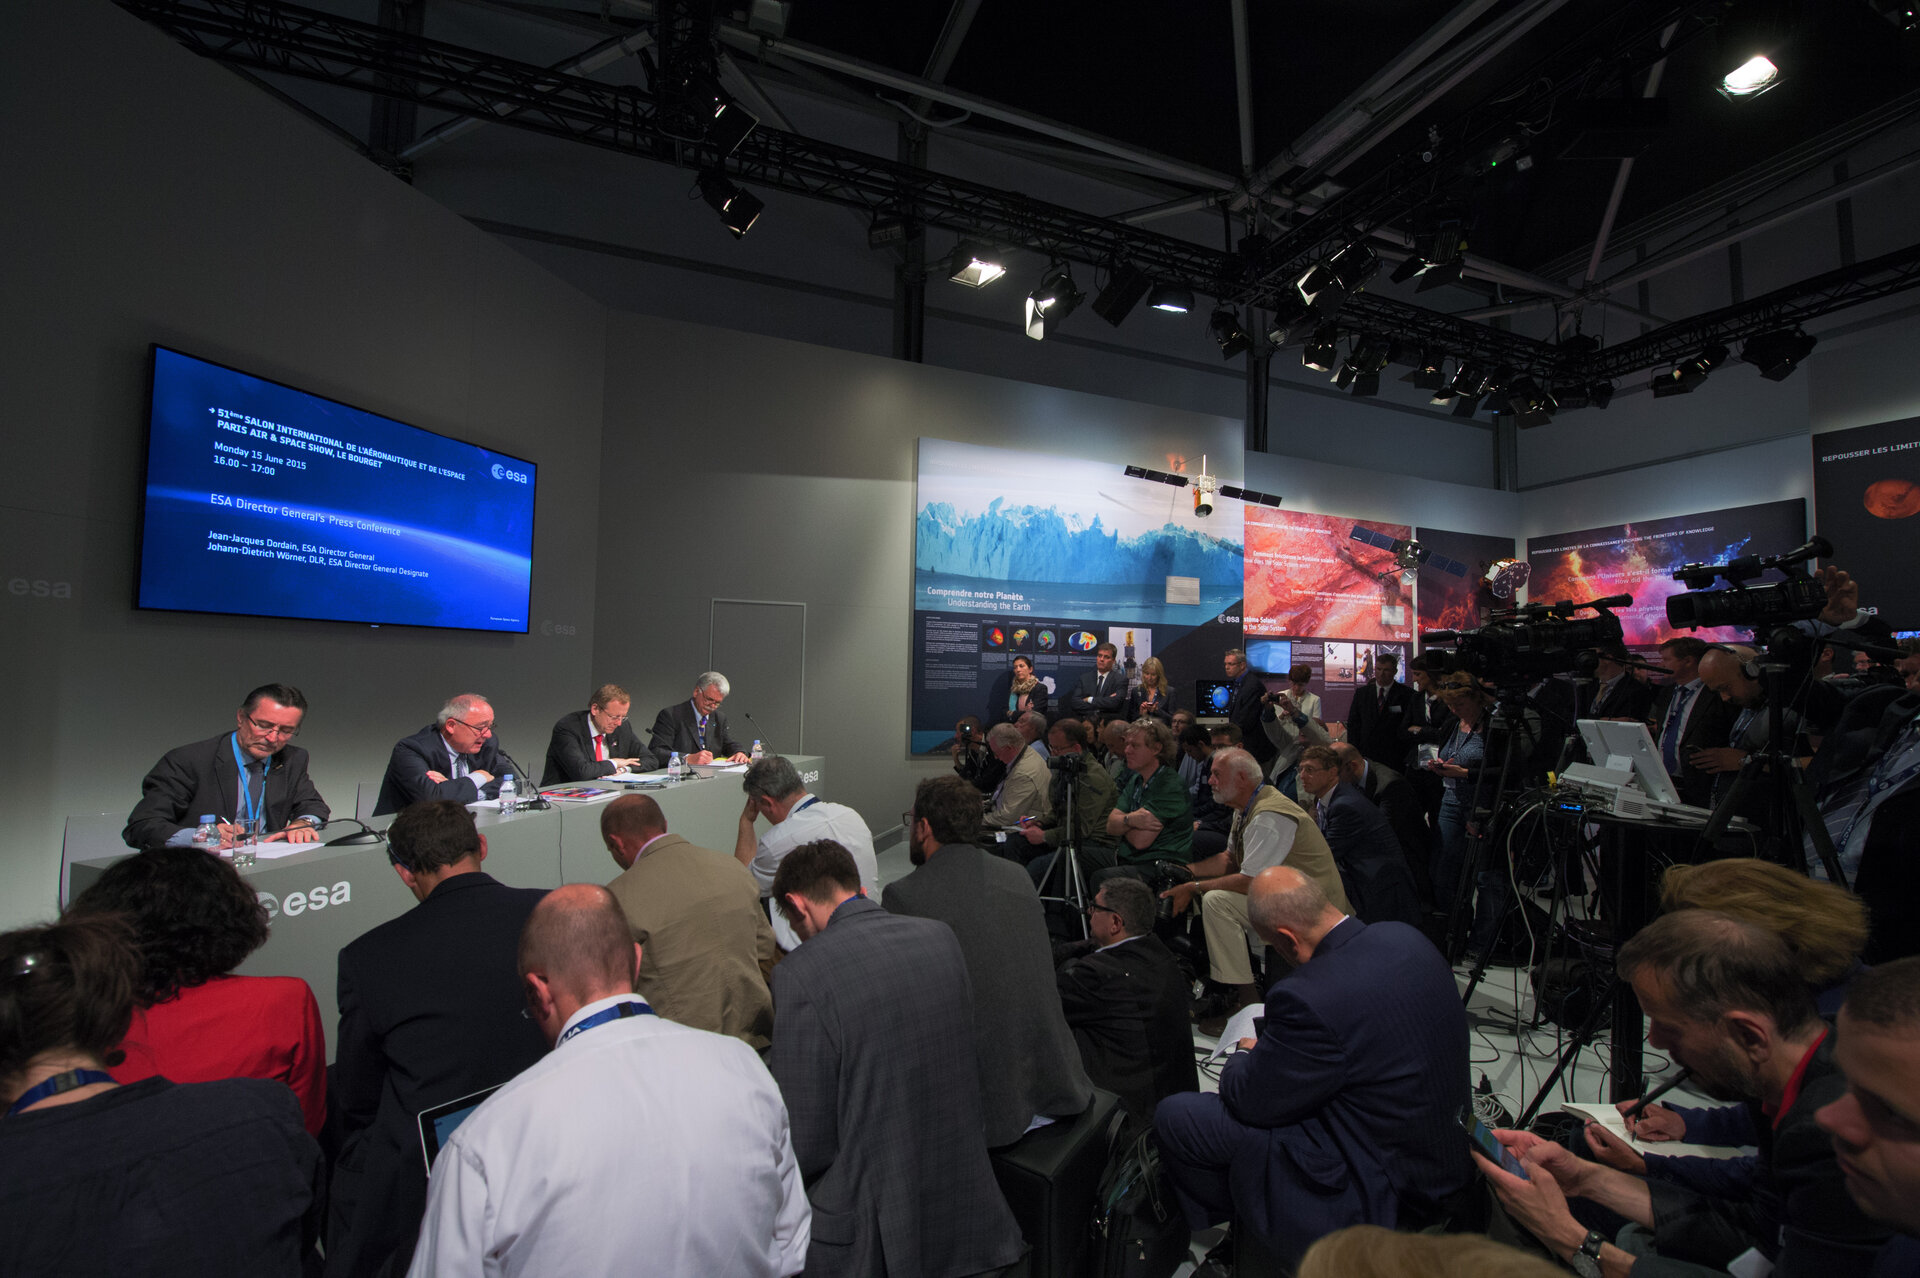 Press conference at the ESA pavilion